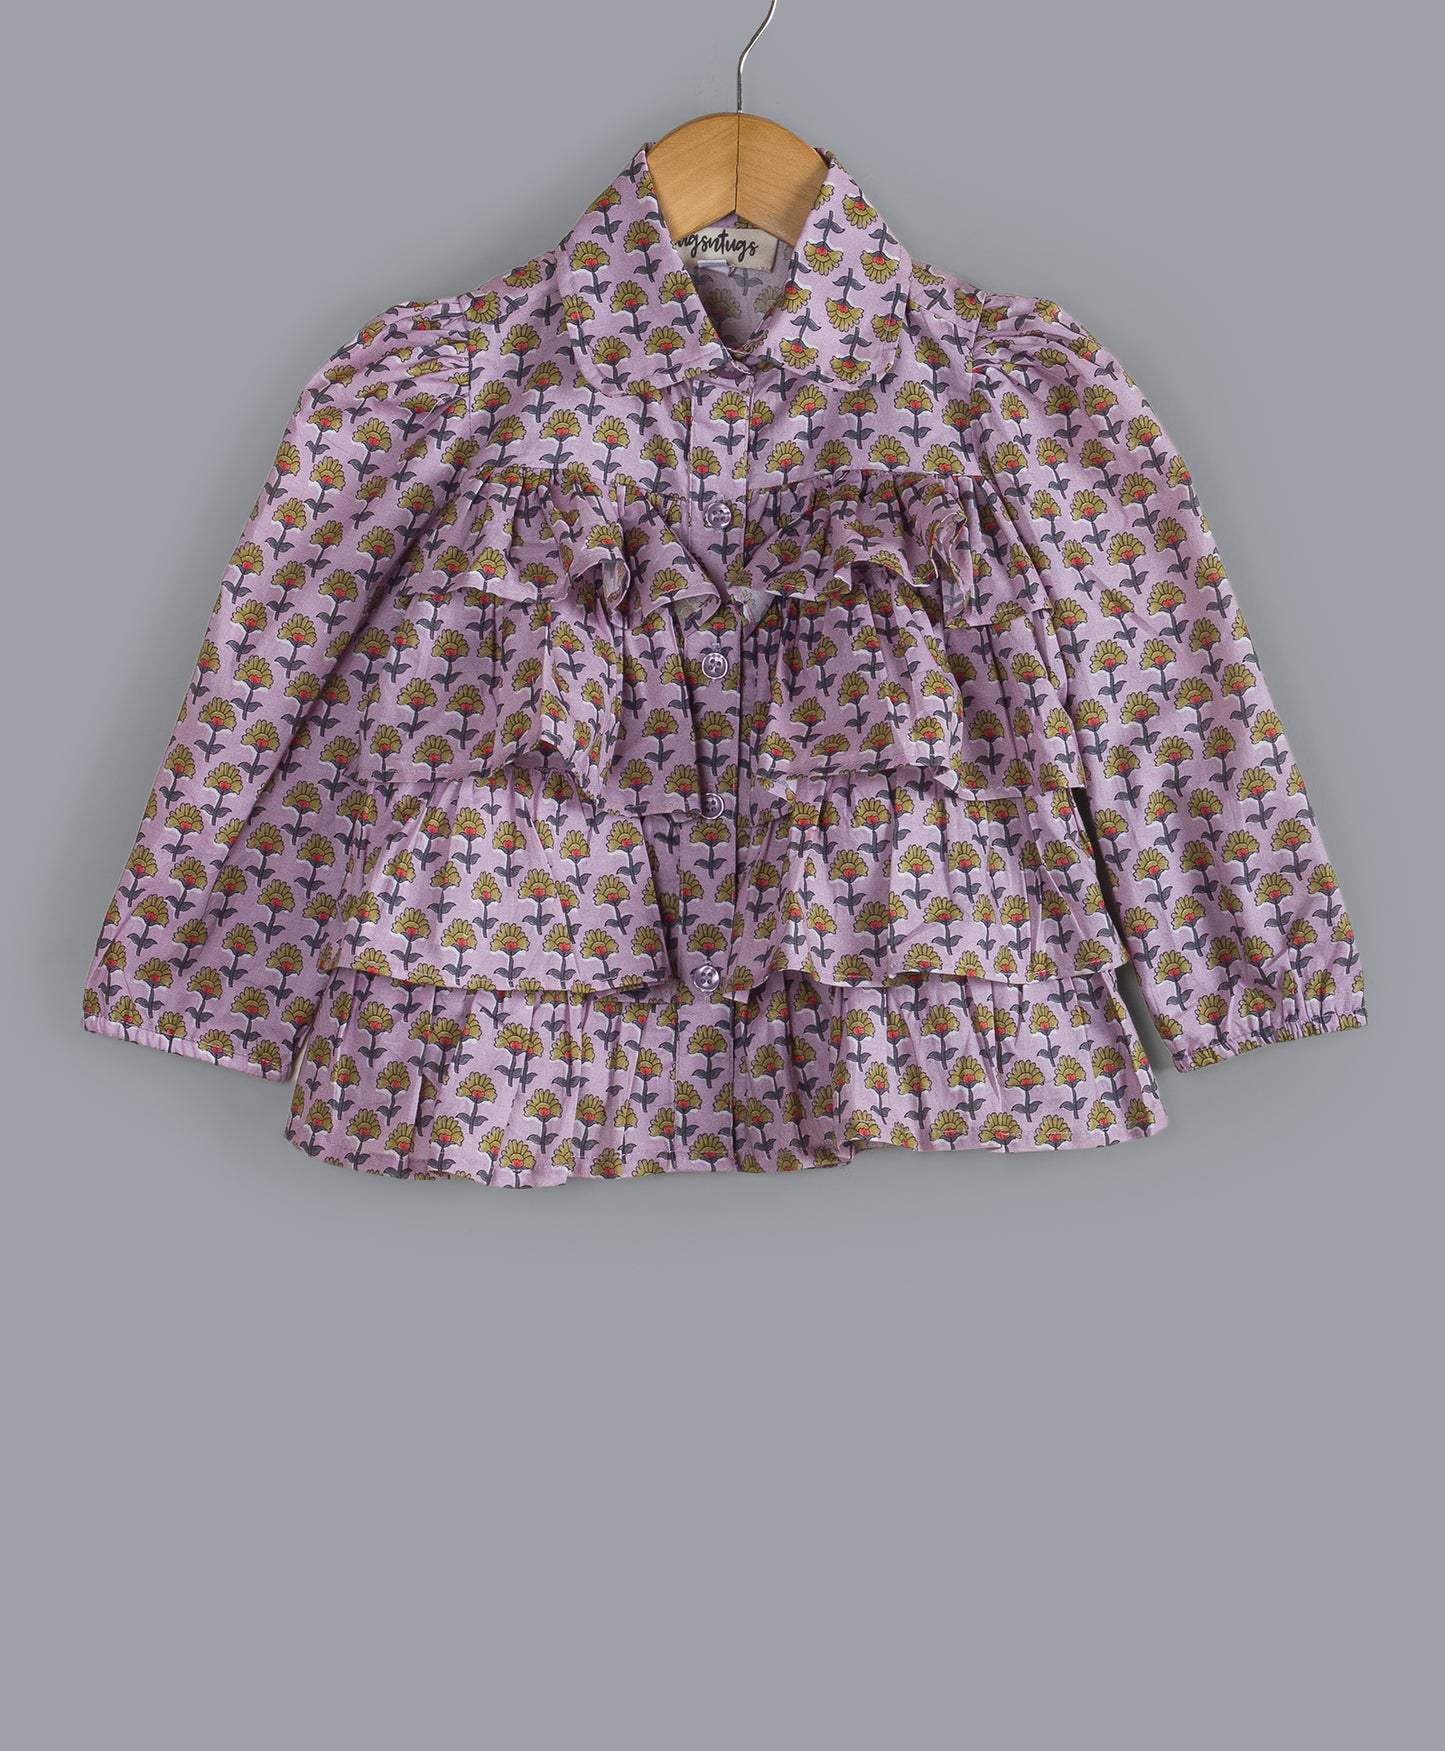 LIGHT PURPLE ALL OVER MOTIF PRINT TOP WITH FRILLS AT FRONT